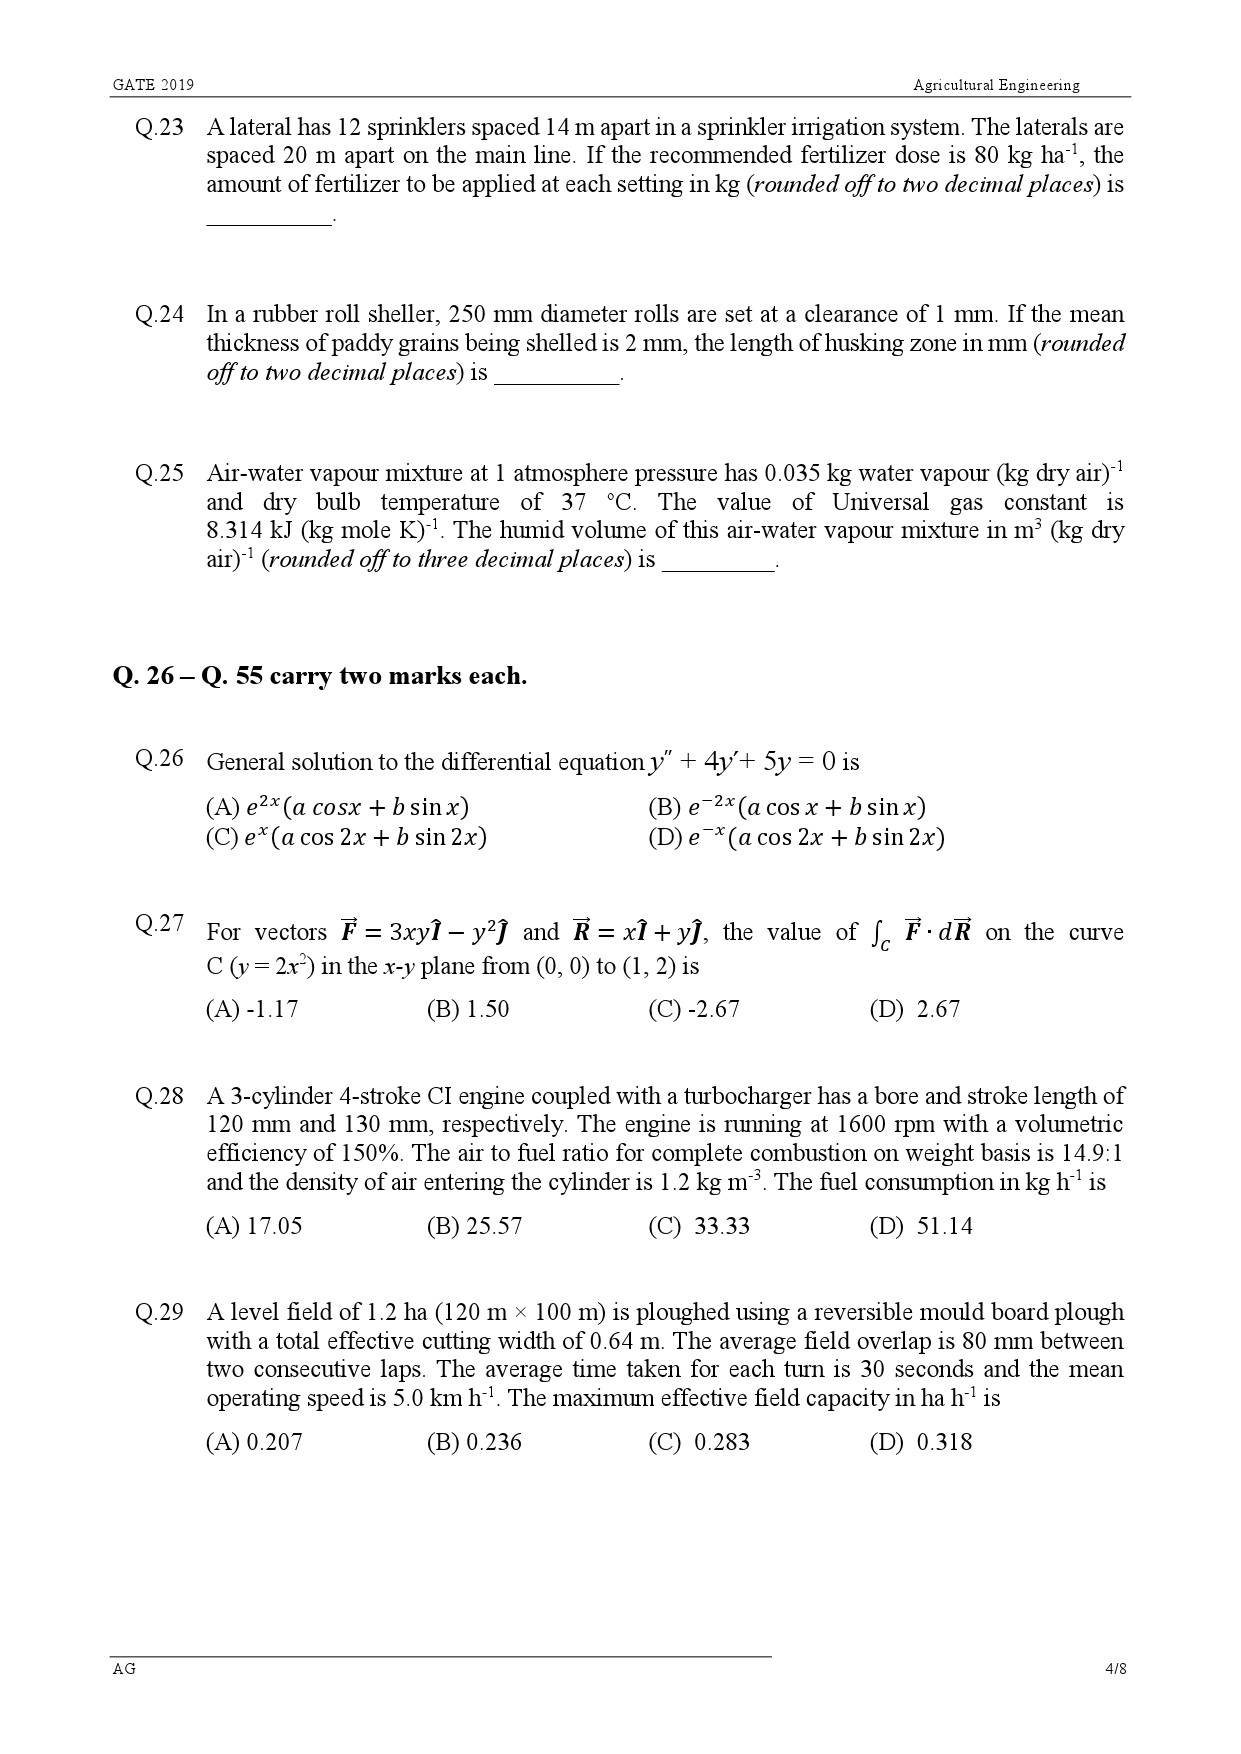 GATE Exam Question Paper 2019 Agricultural Engineering 4